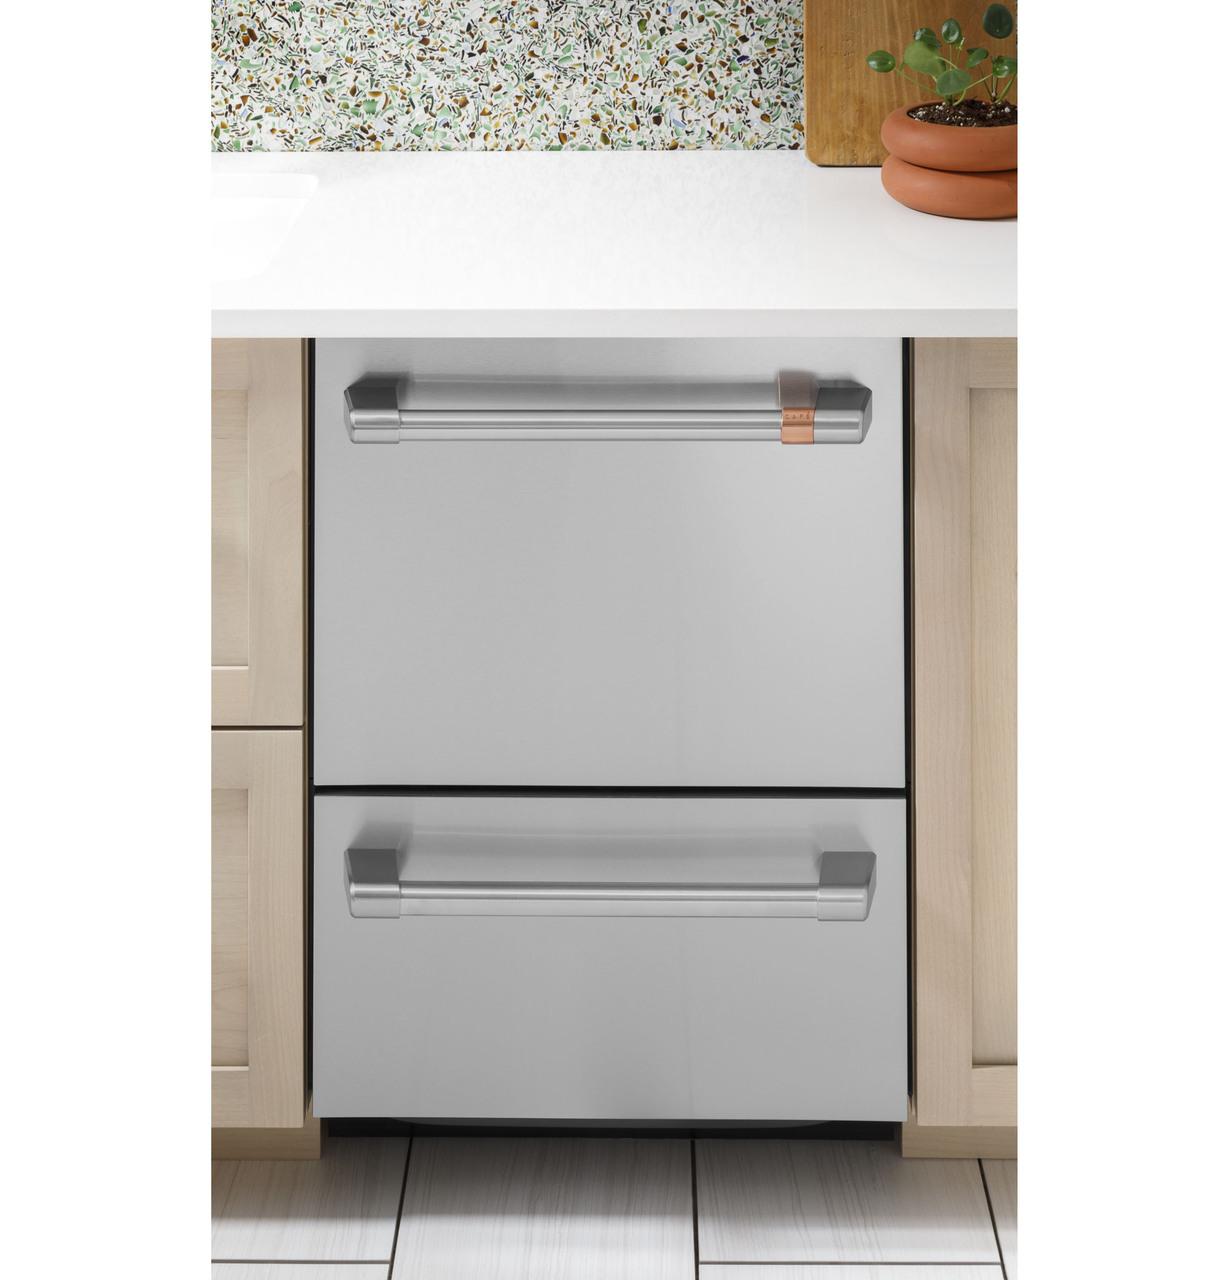 CDD420P2TS1 by Cafe - Café™ Dishwasher Double Drawer